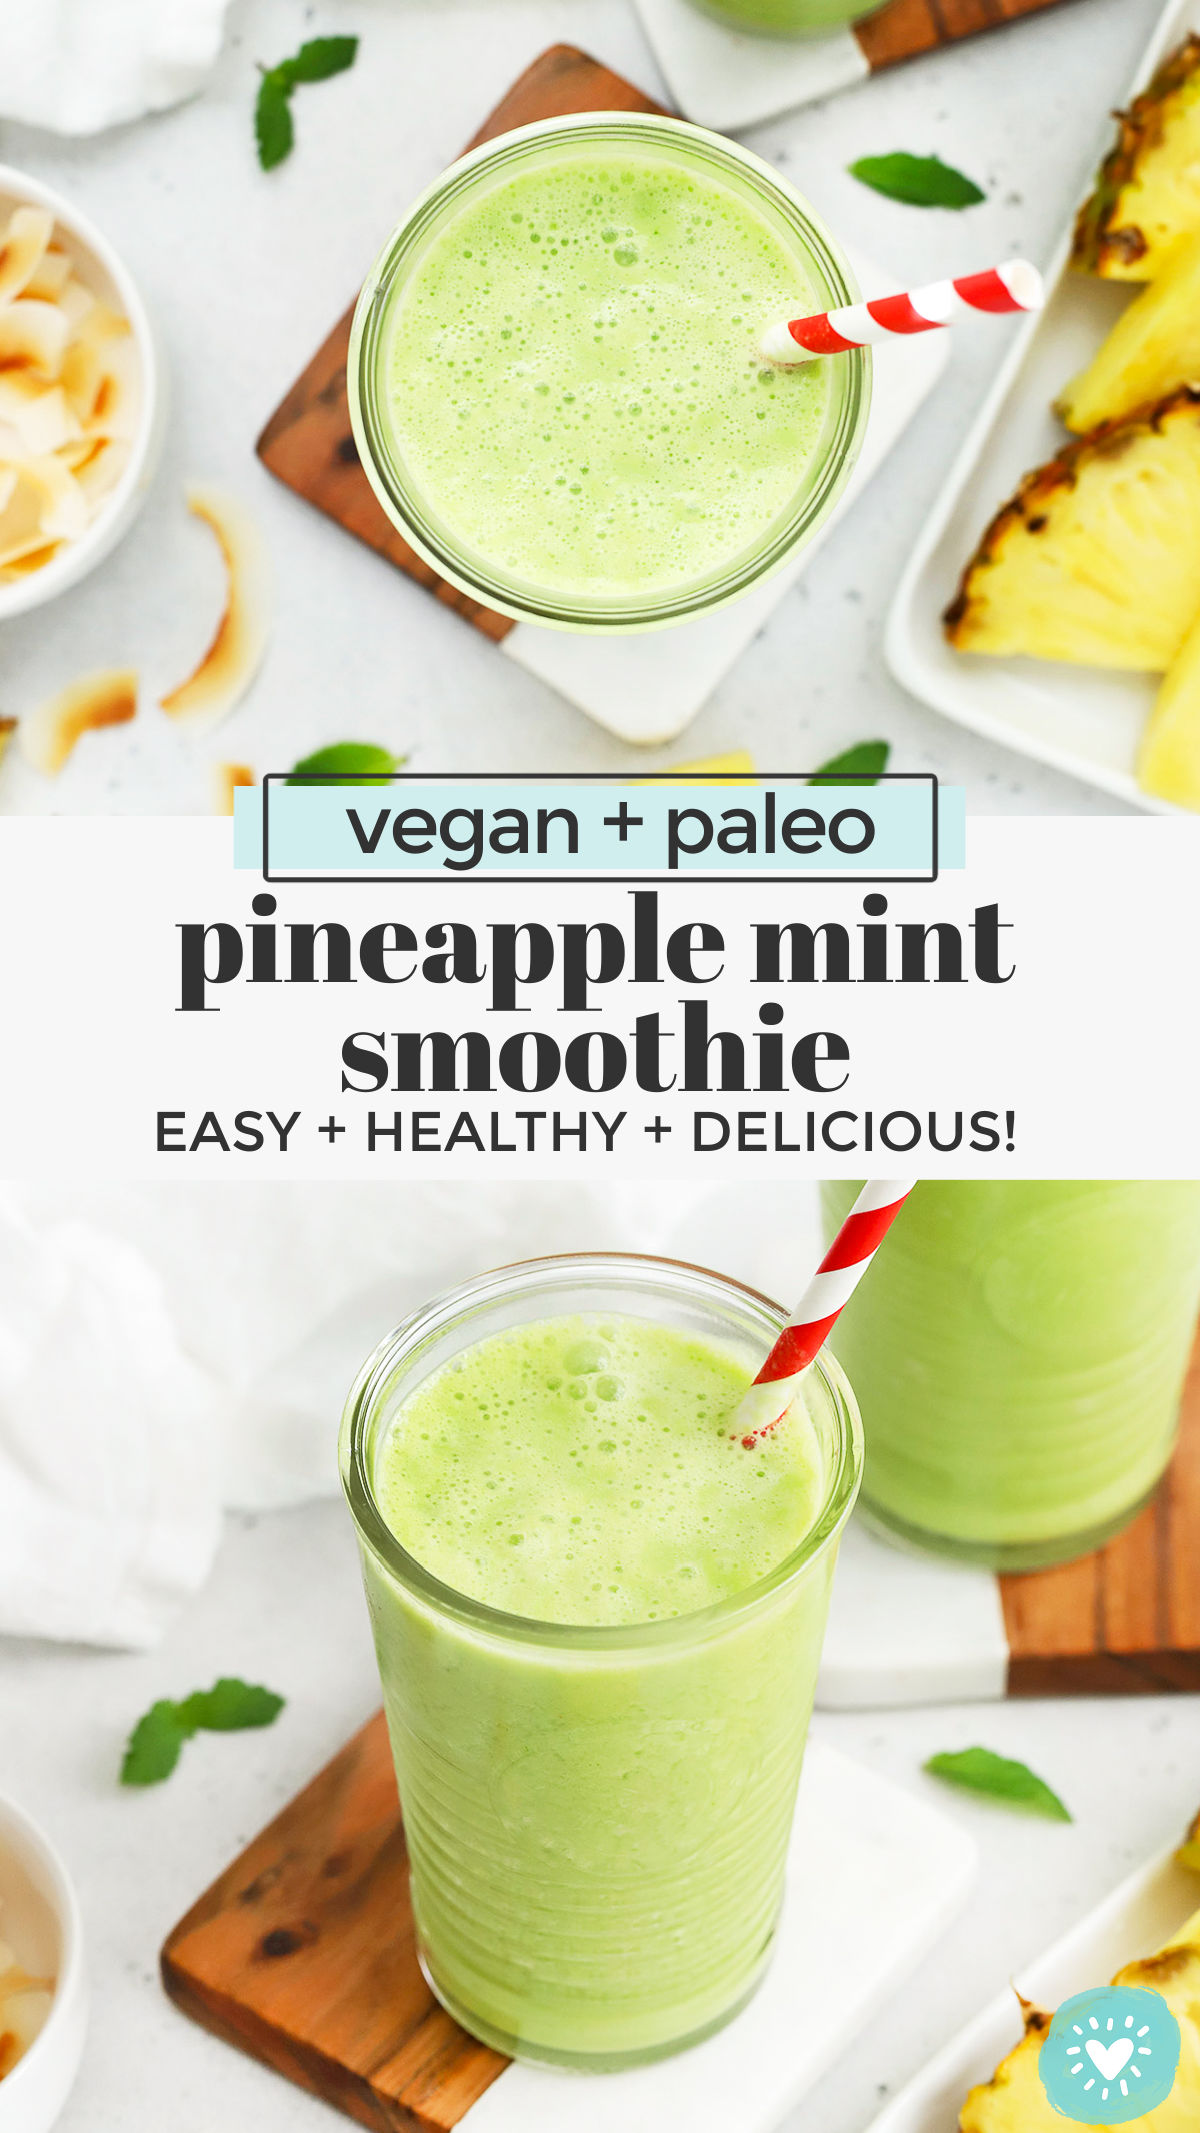 Pineapple Mint Smoothie - This light, fresh pineapple smoothie makes a beautiful healthy breakfast or snack! A perfect kid-friendly green smoothie! (Vegan, Paleo) // Vegan pineapple smoothie // paleo pineapple smoothie // kid friendly green smoothie // green smoothie #smoothie #greensmoothie #vegan #healthybreakfast #healthysnack #paleo